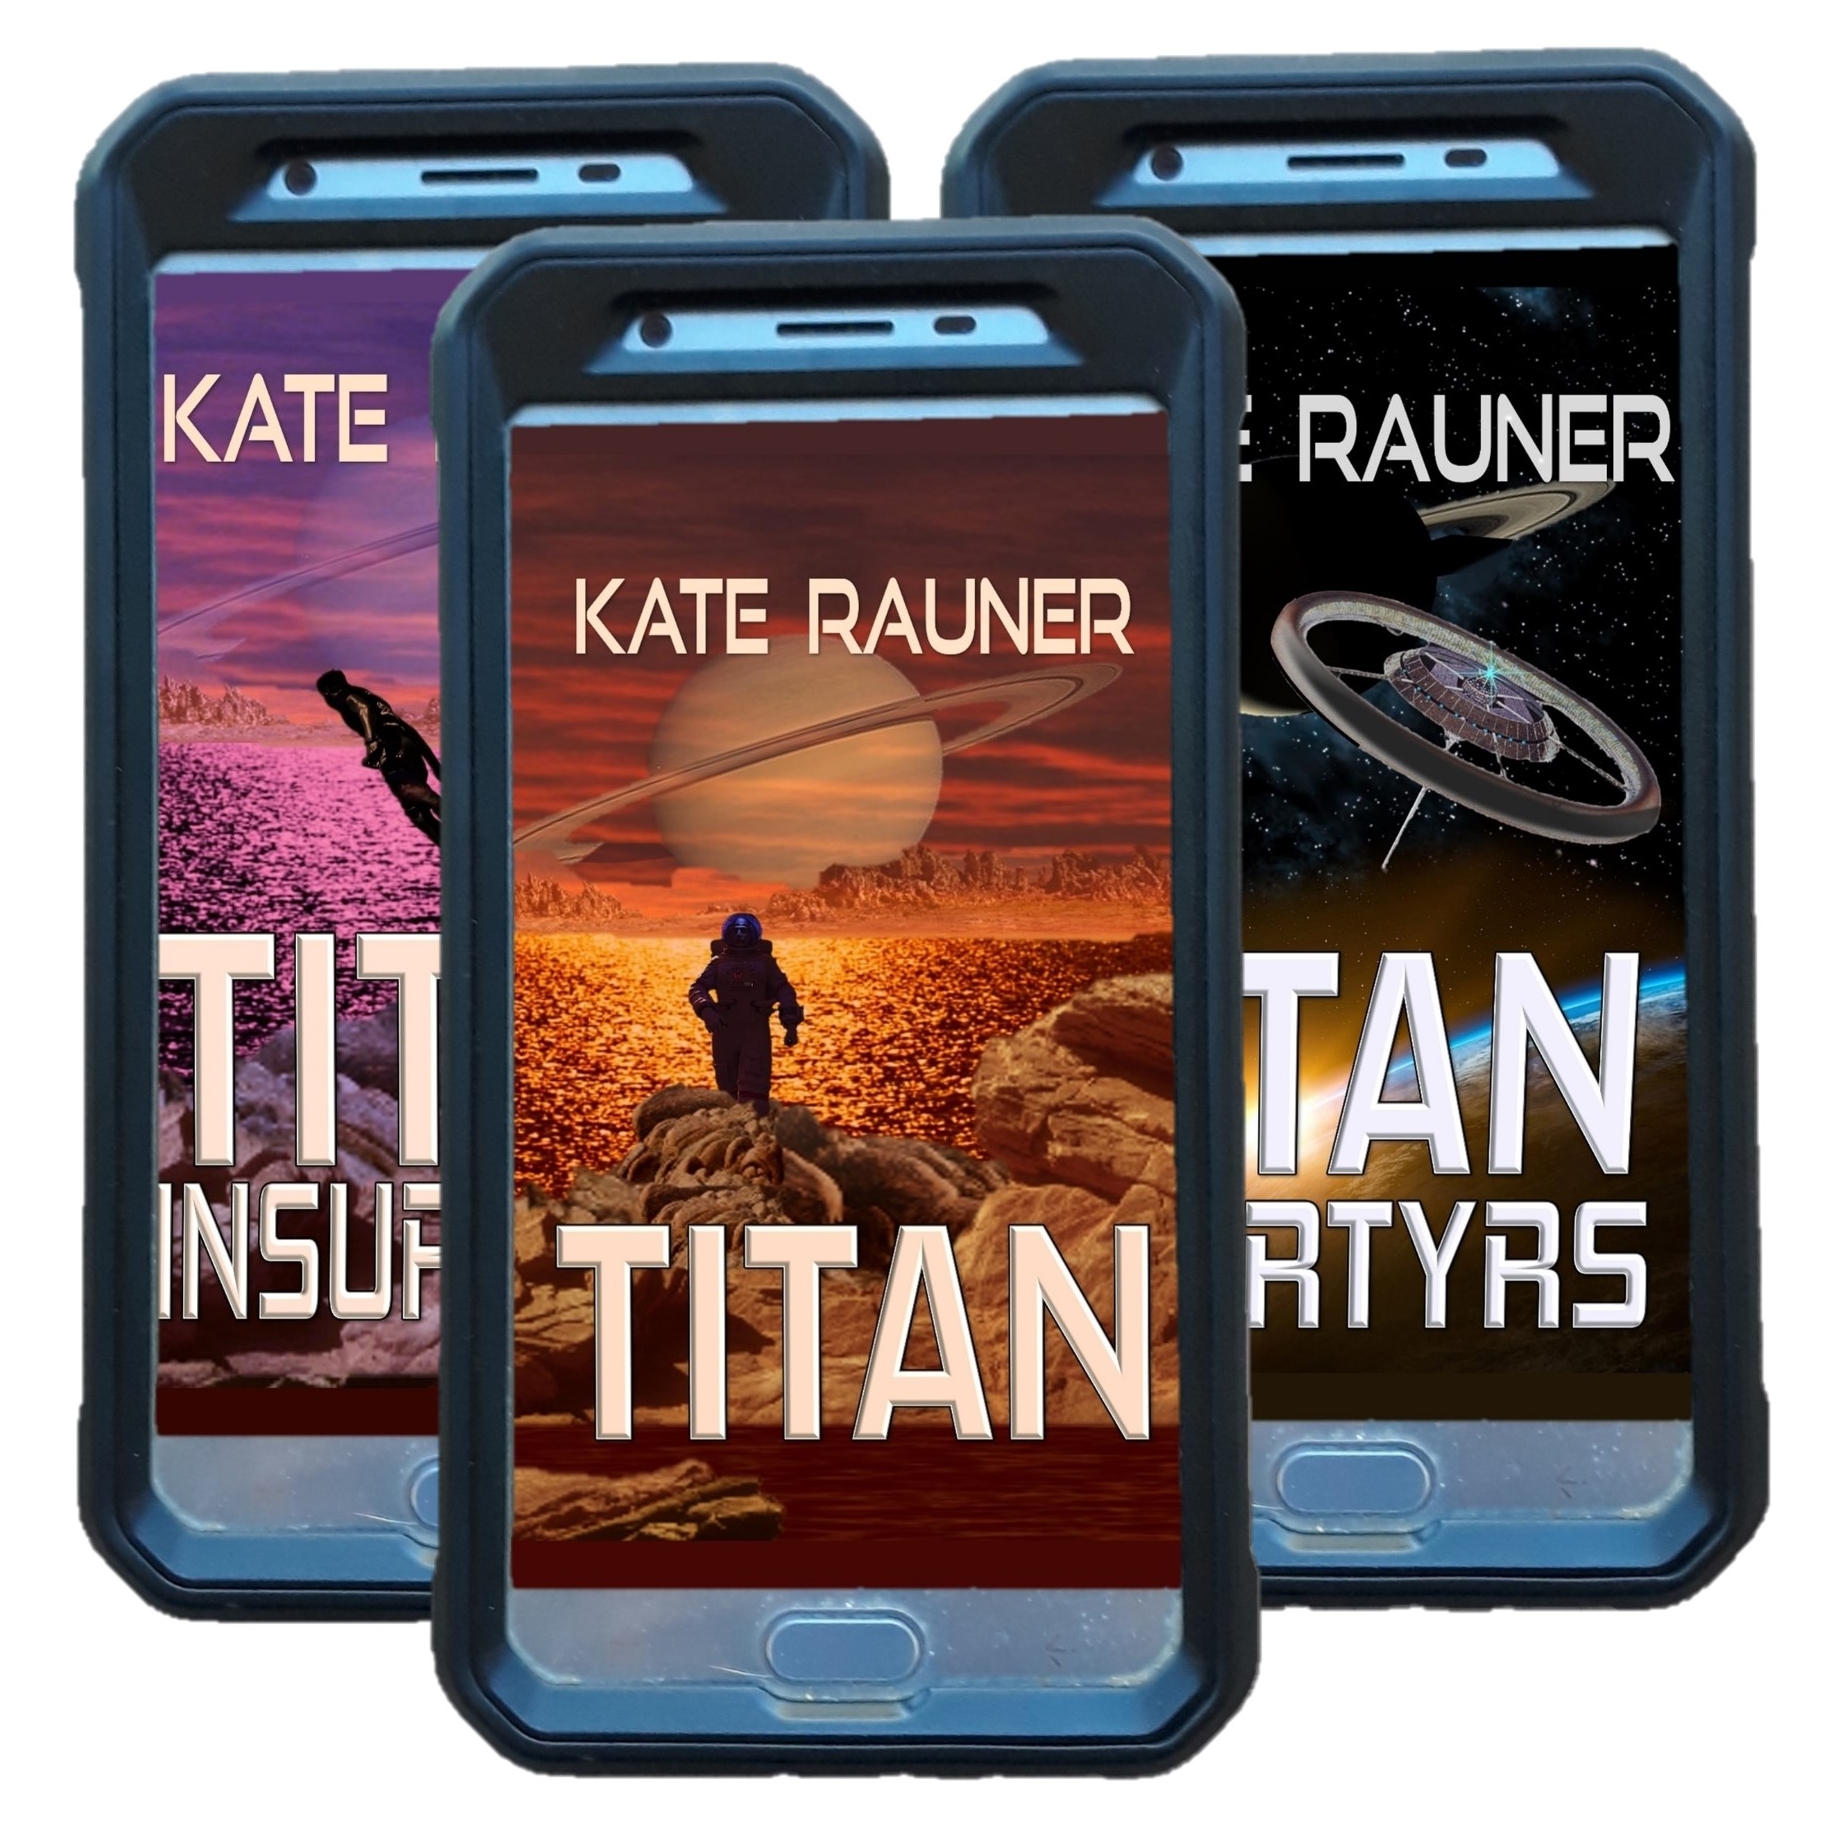 Titan Trilogy Scifi Book Covers on Phones